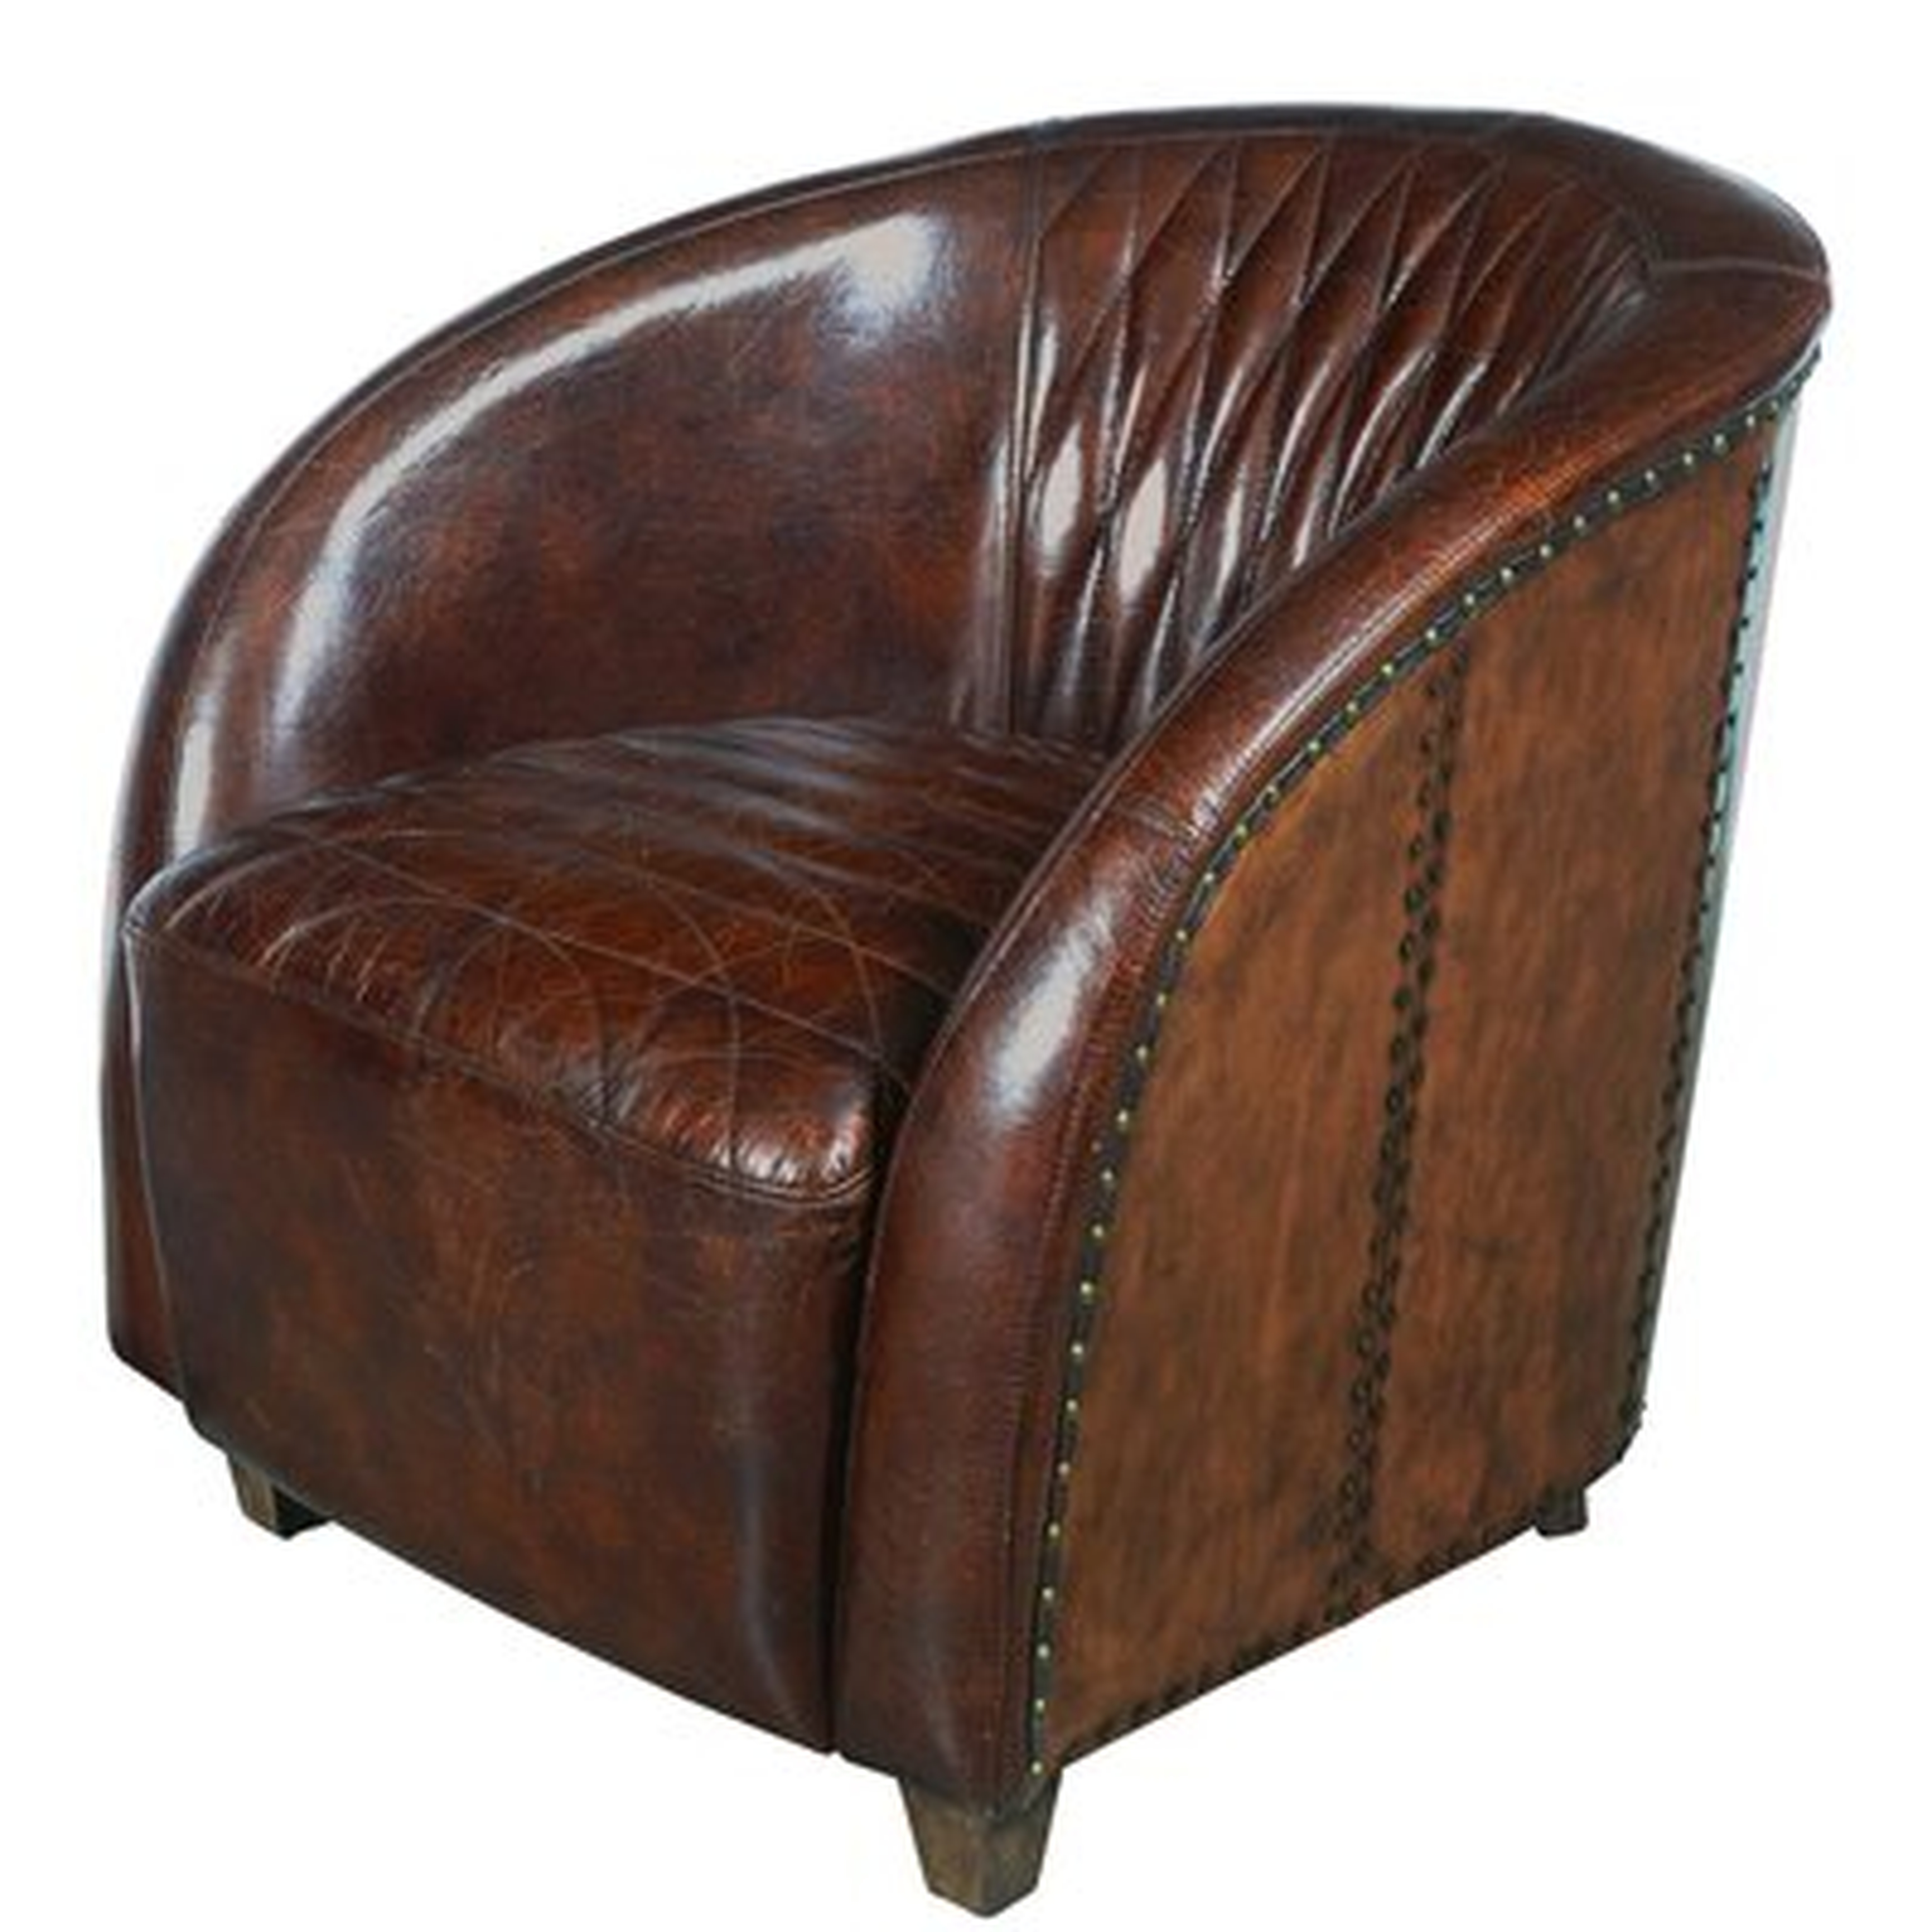 Sheldon Quilted Leather and Copper Club Chair in Chestnut Brown - Wayfair